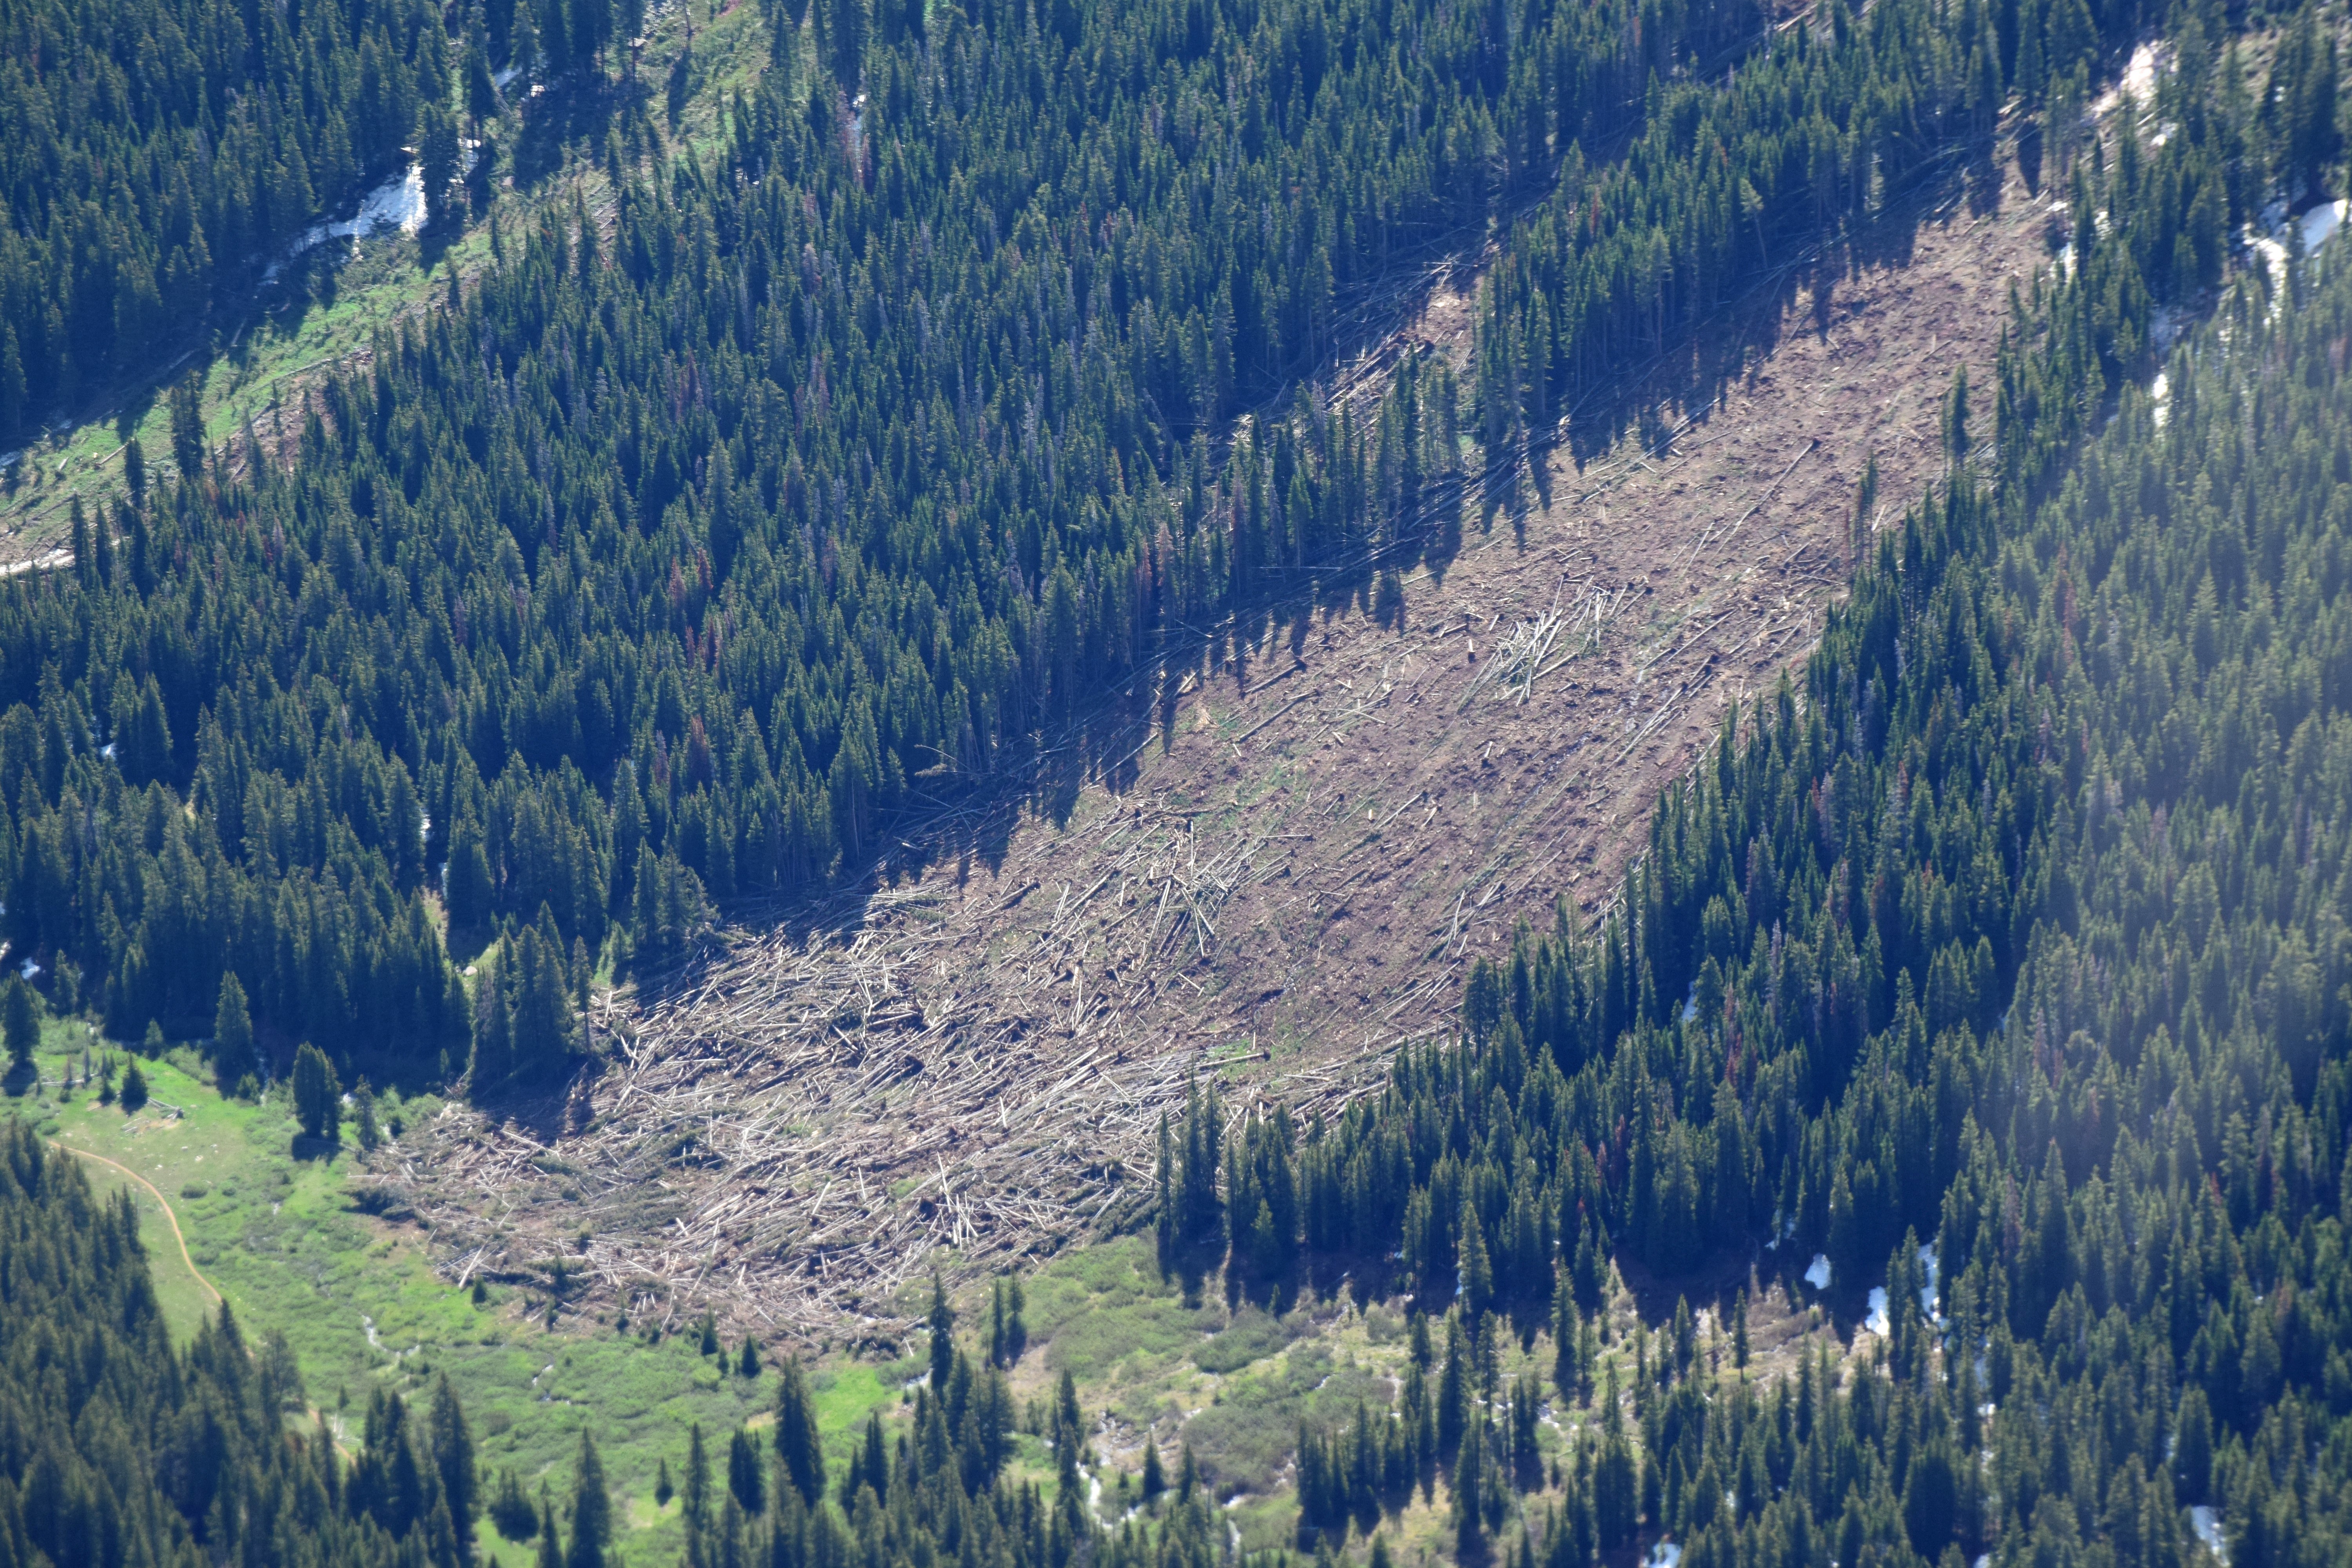 Image of an avalanche in Colorado as observed in 2019